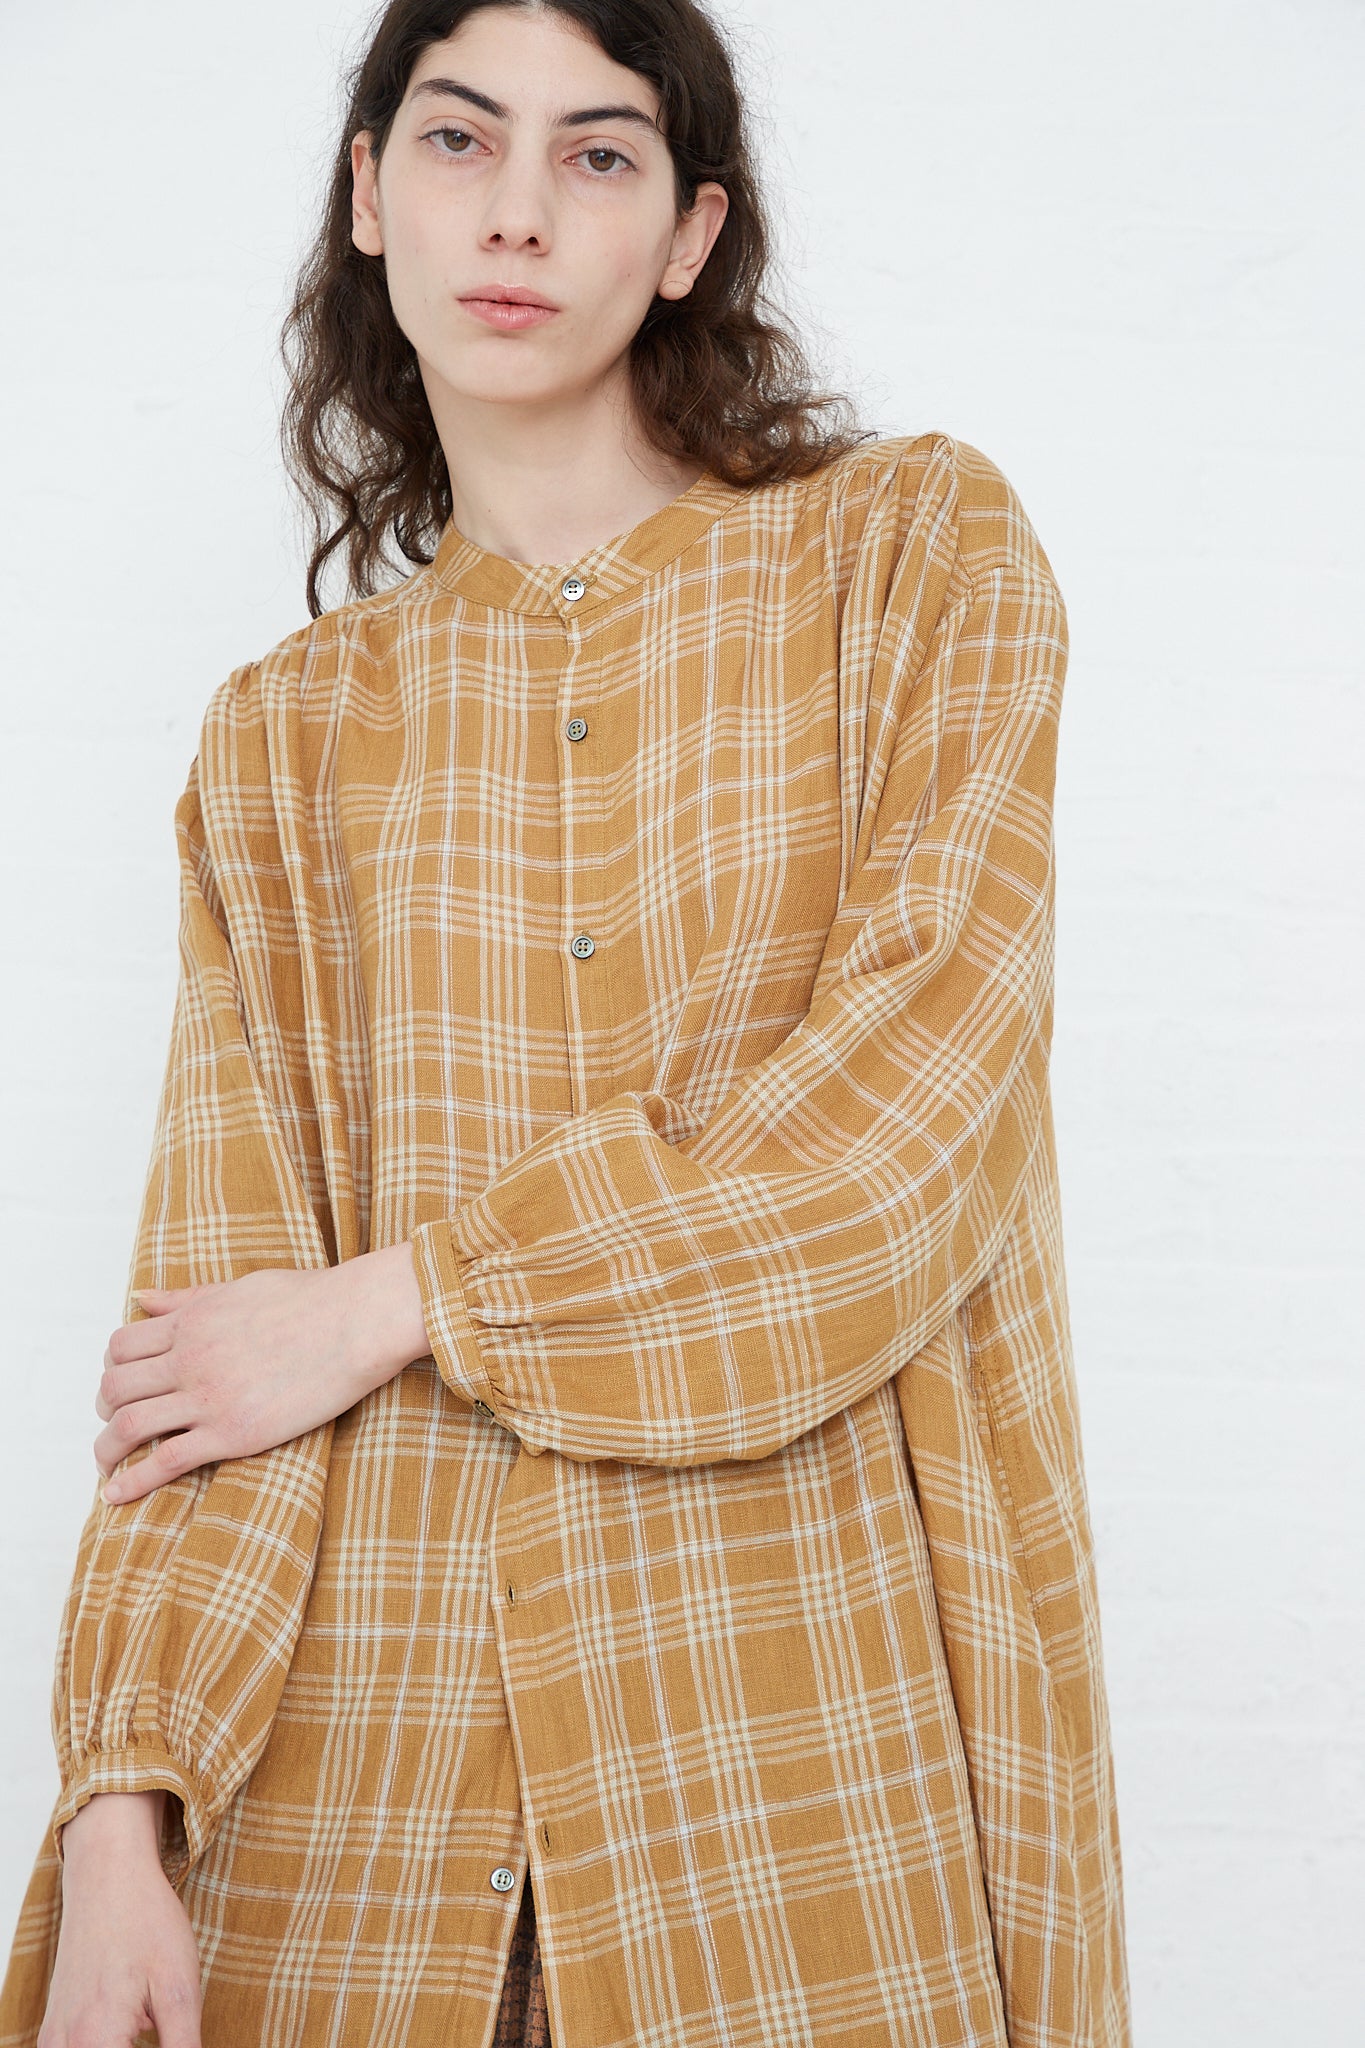 A model wearing a relaxed fit Linen Check Dress in Camel by Ichi Antiquités.